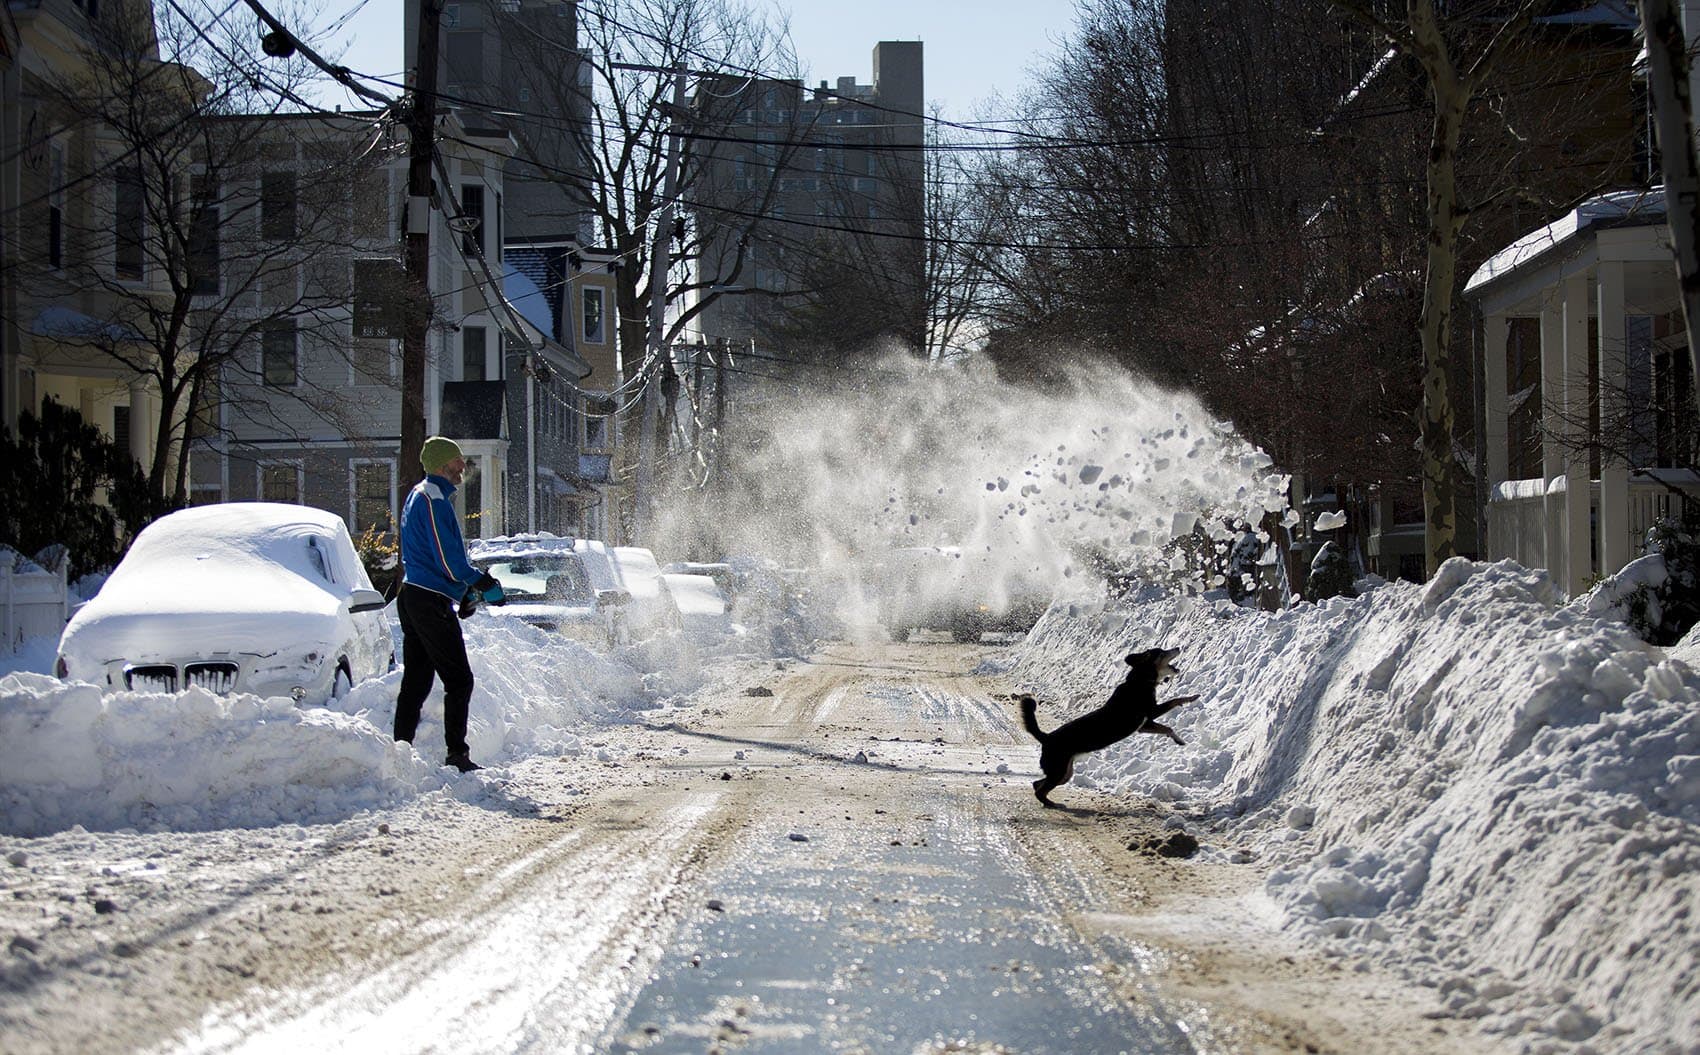 As Reed Alexander shovels his out his car on Banks Street in Cambridge, his dog Widget jumps into the snow he throws onto the snowbank across the street. (Jesse Costa/WBUR)